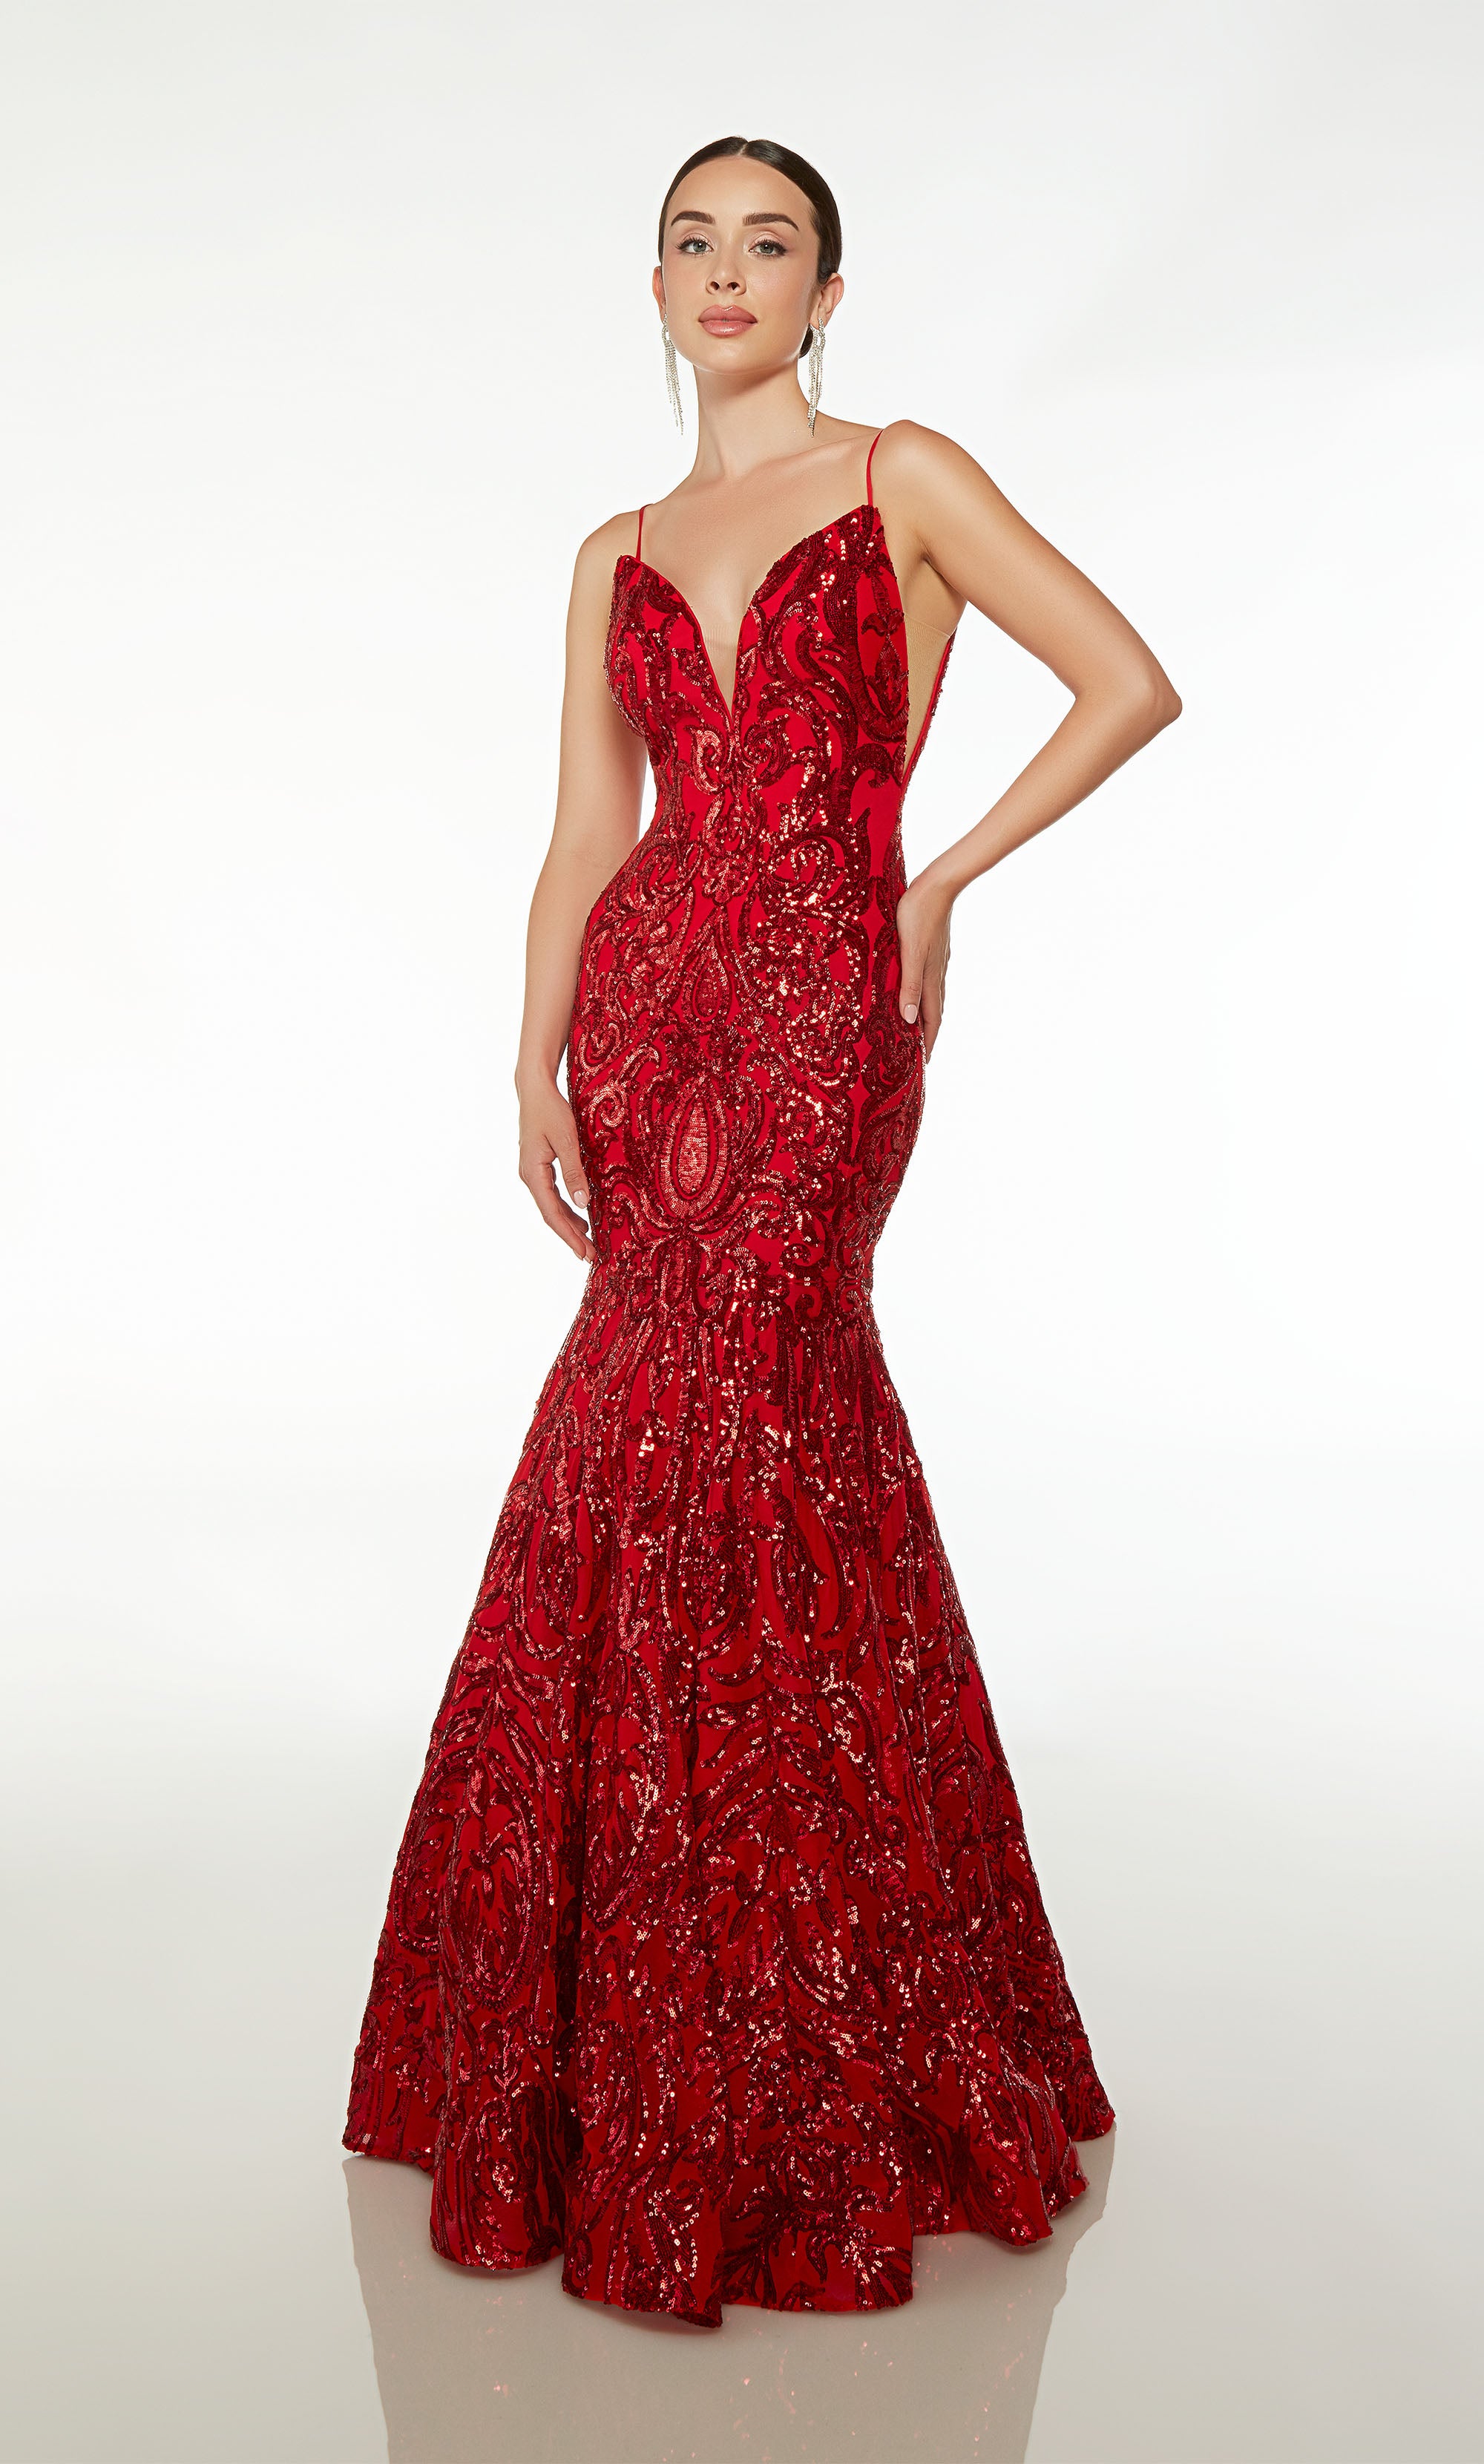 Elegant red sparkly mermaid prom dress: plunging neckline, illusion cutouts, V-shaped open back—an dazzling and sophisticated ensemble.